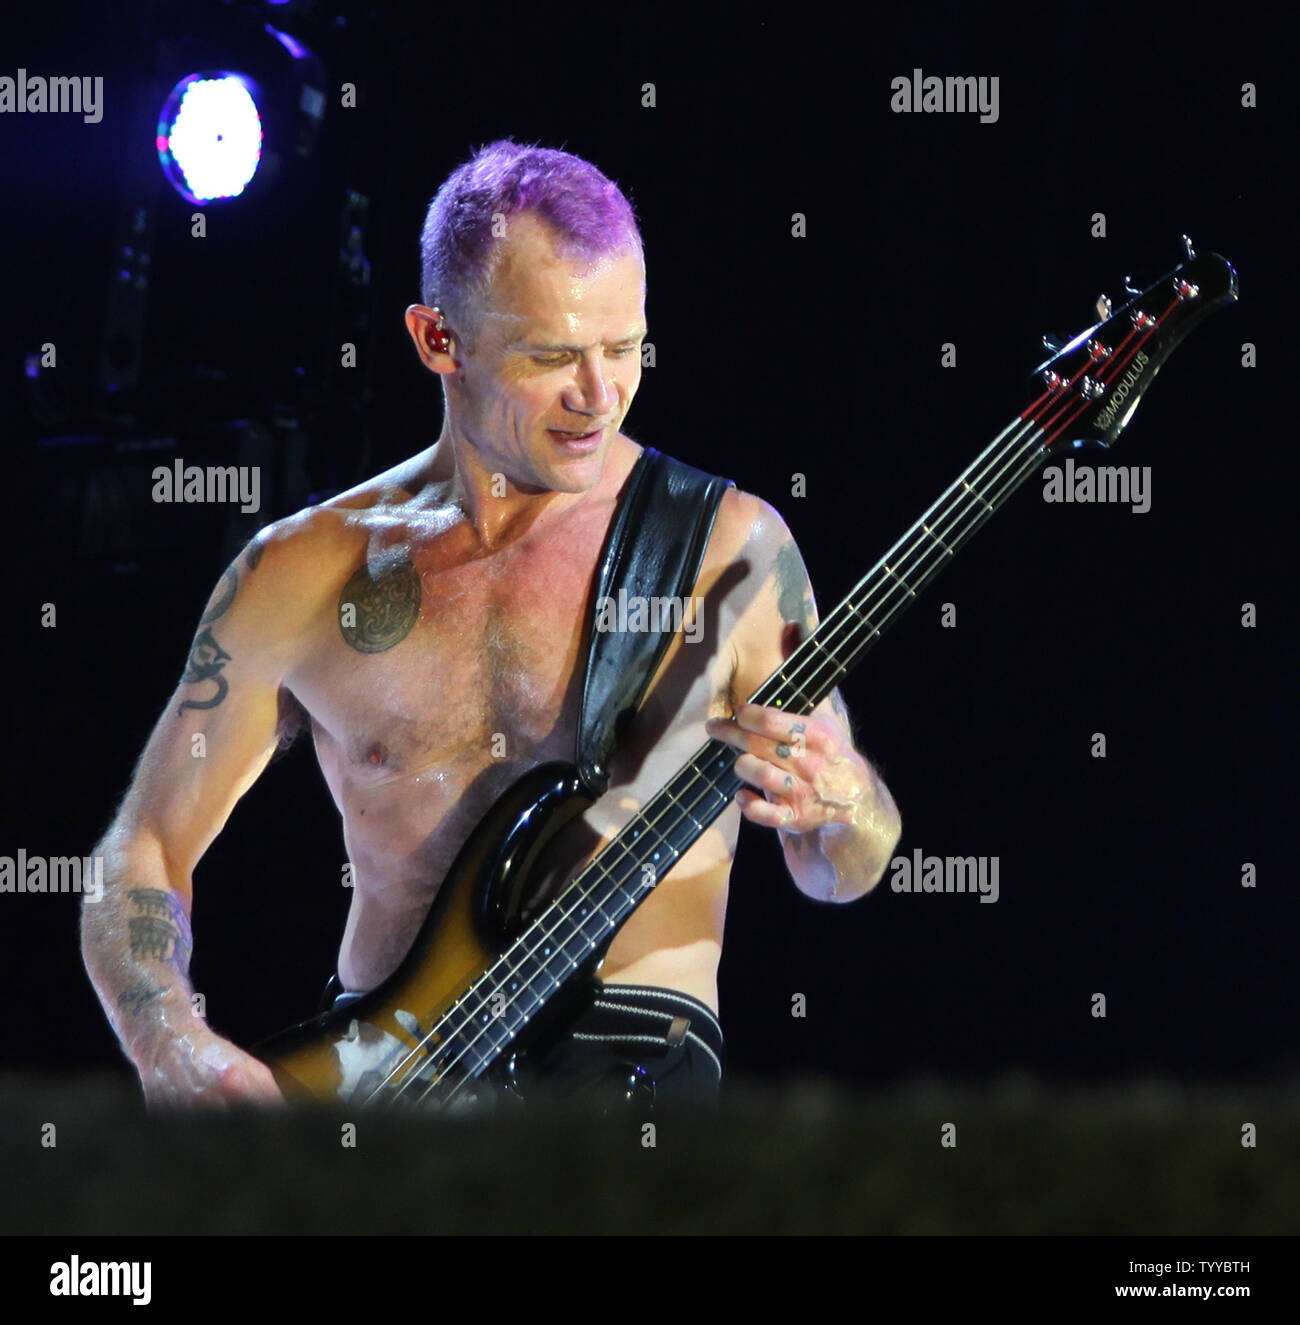 Flea, whose real name is Michael Peter Balzary, plays the bass guitar while performing with the Red Hot Chili Peppers in concert at Bercy in Paris on October 18, 2011.   UPI/David Silpa Stock Photo